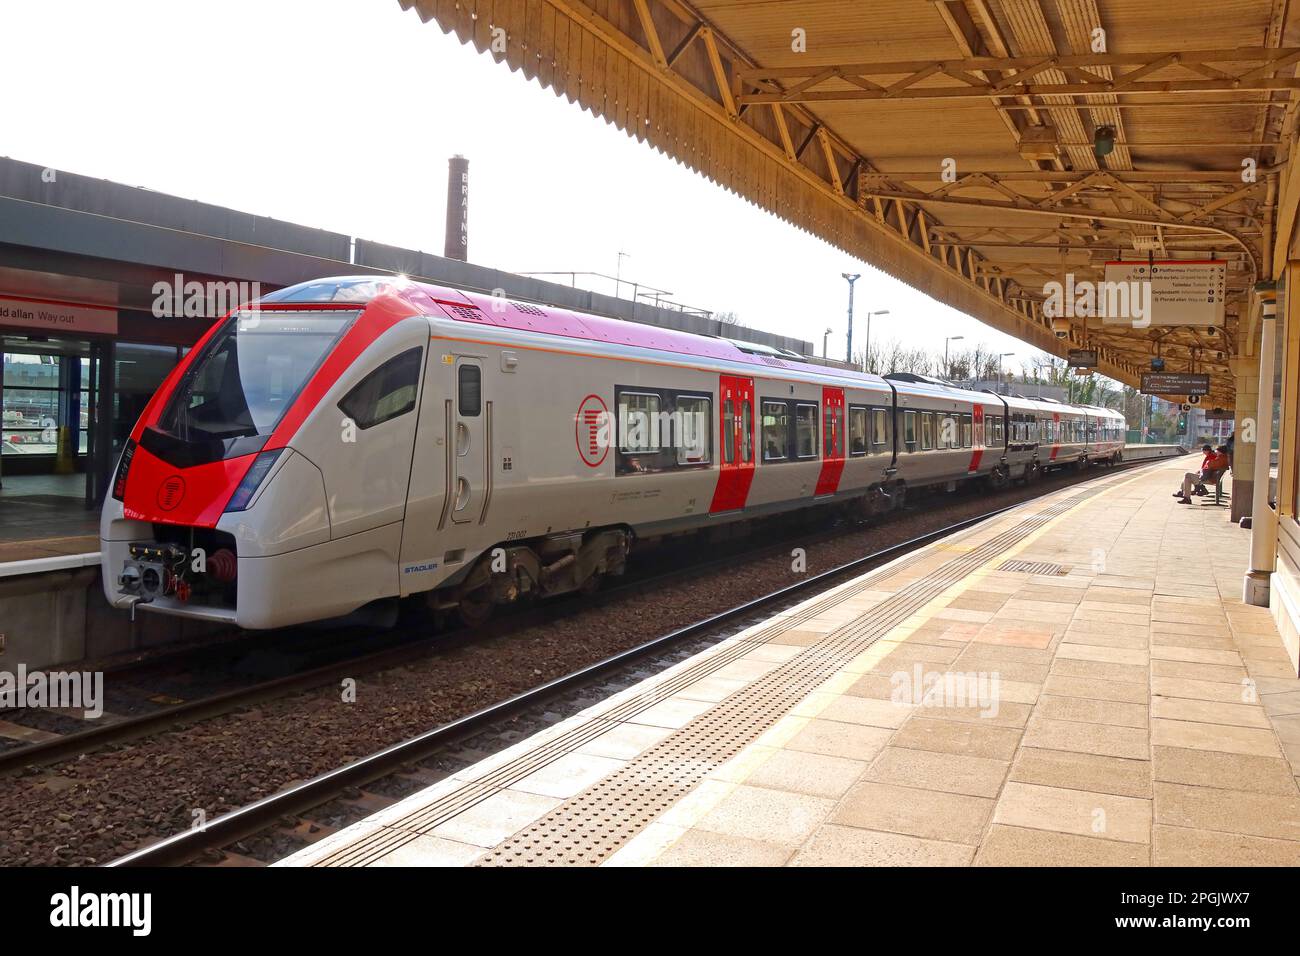 Stadler 231007 - British Rail Class 231, at Cardiff Central railway station, TfW train, Wales, UK, CF10 1EP Stock Photo